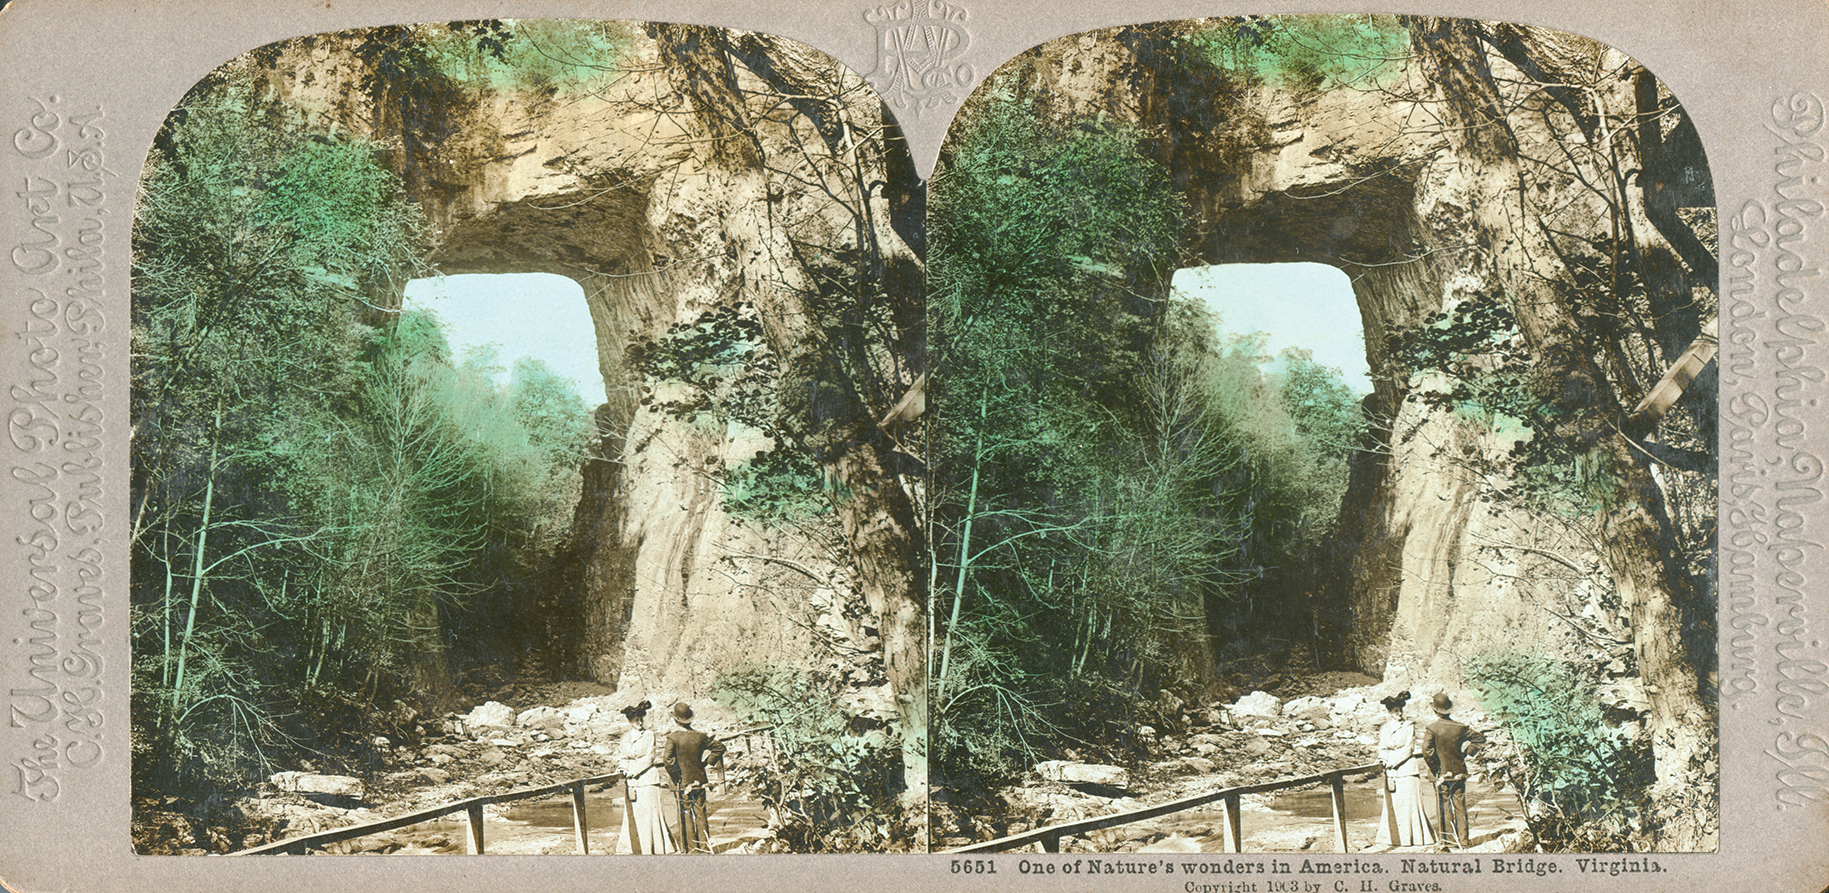 C. H. Graves, Publisher, “One of Nature’s wonders in America. Natural Bridge. Virginia,” 1903, hand tinted stereo card 